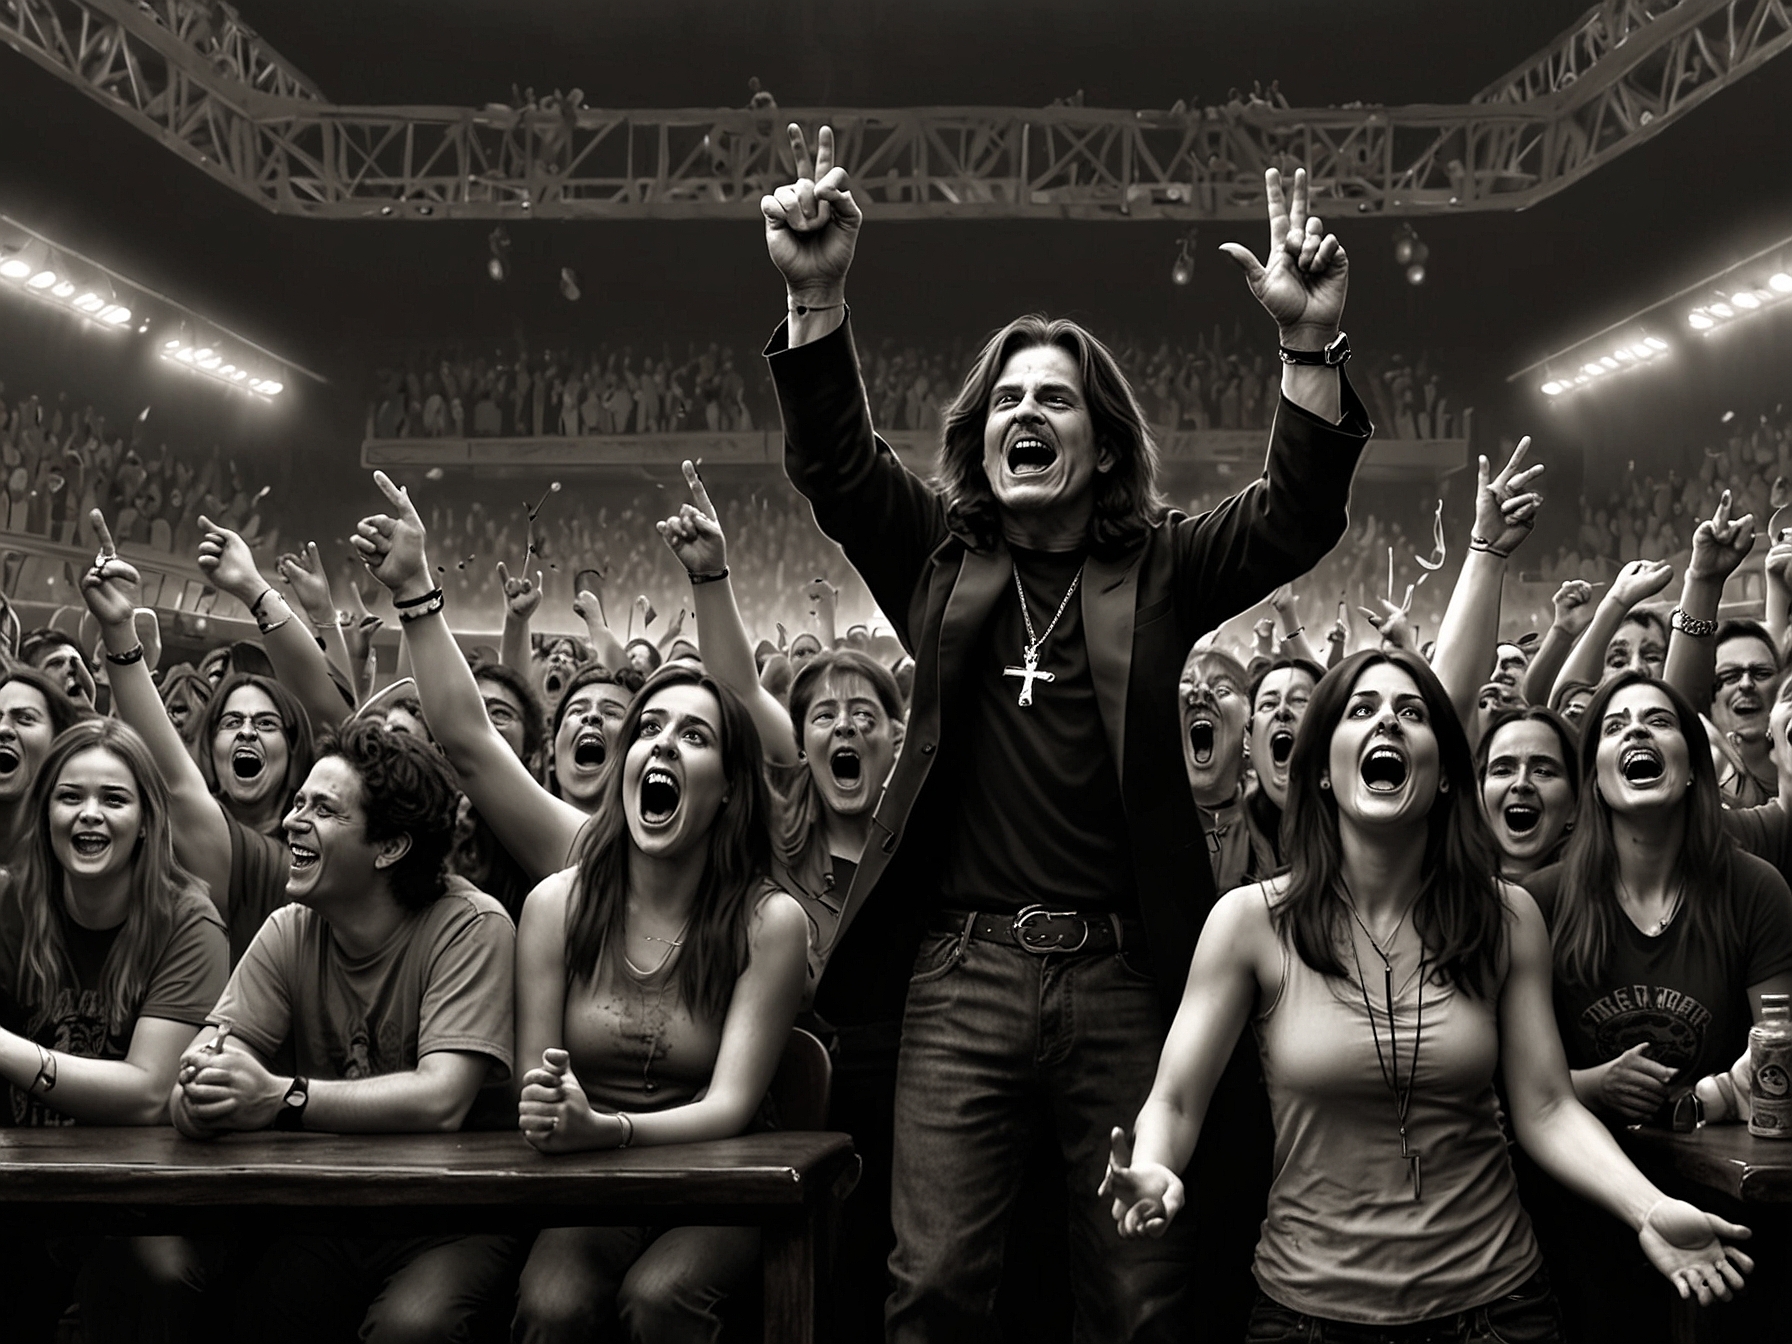 A lively crowd at a monster movie convention, eagerly awaiting appearances from icons. This image captures the excitement and energy of convention-goers who were anticipating Ozzy Osbourne's presence.